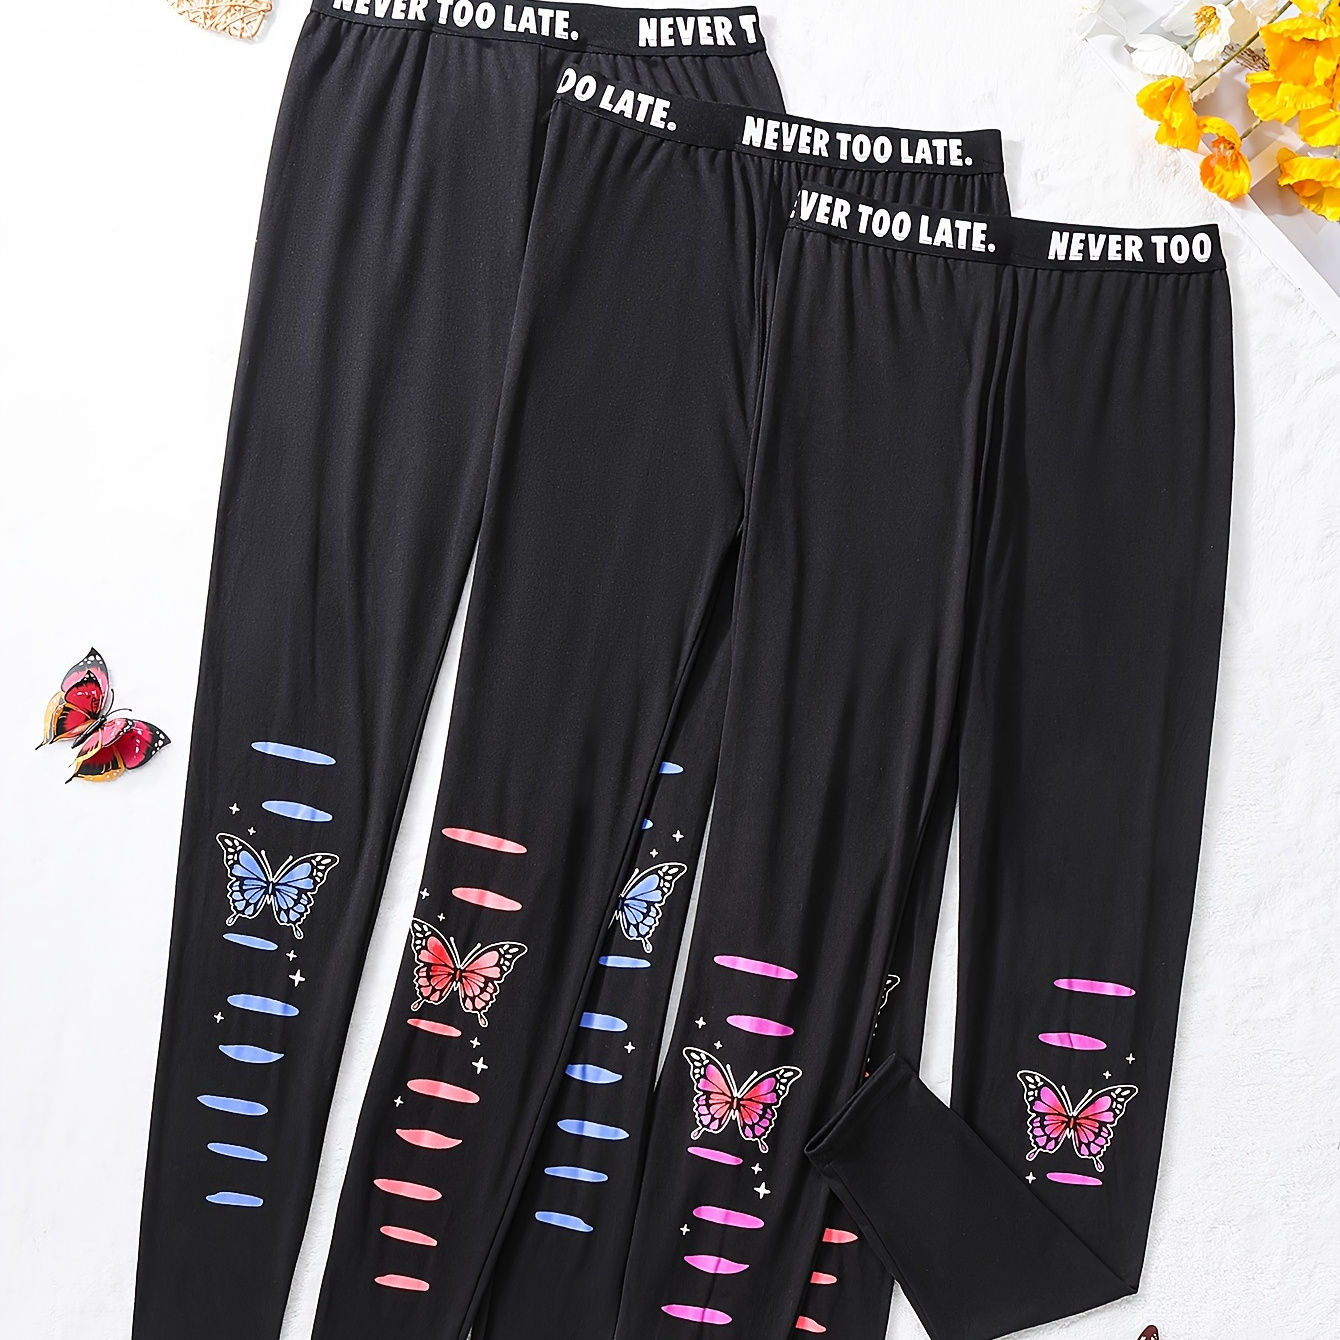 

Girls 3pcs, Casual Ripped Hole Graphic Butterfly Print Leggings Comfy Yoga Pants For Outdoor Sports Running Gift